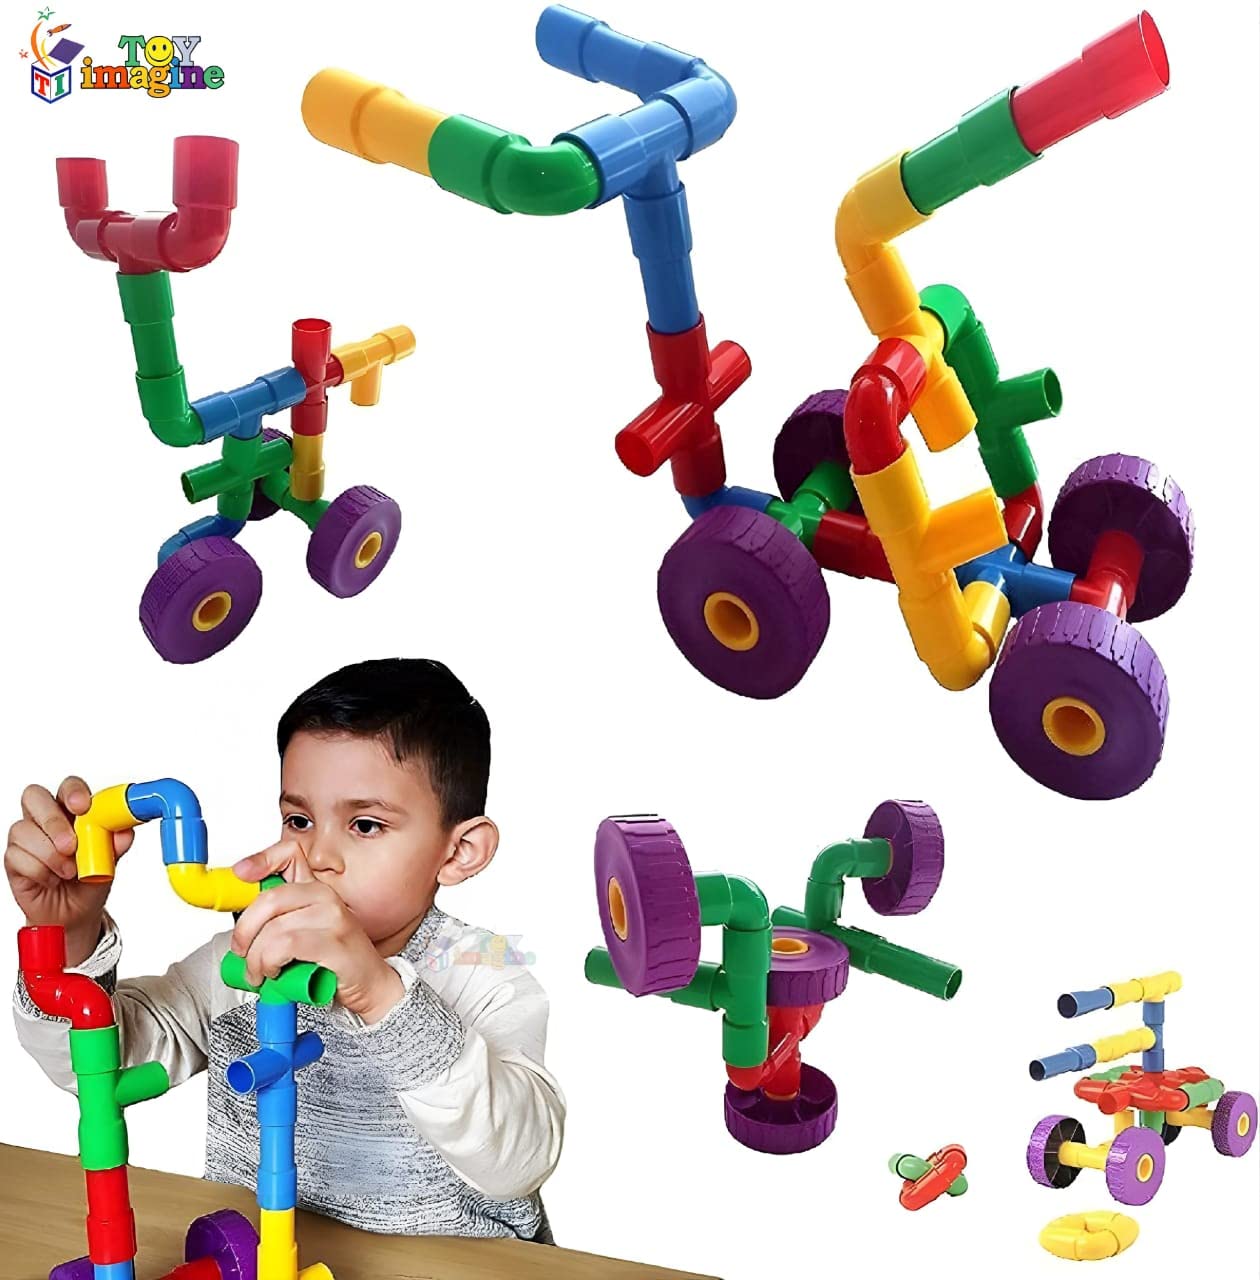 Toy Imagine™ 30+ Pipe-Shaped Puzzle Building Blocks for Preschool Kids | Creative Educational Plastic Water Pipe Toys | Intelligent Blocks Set | Learn with Fun | Rounded Edge.(Multicolor) 3-8 Years